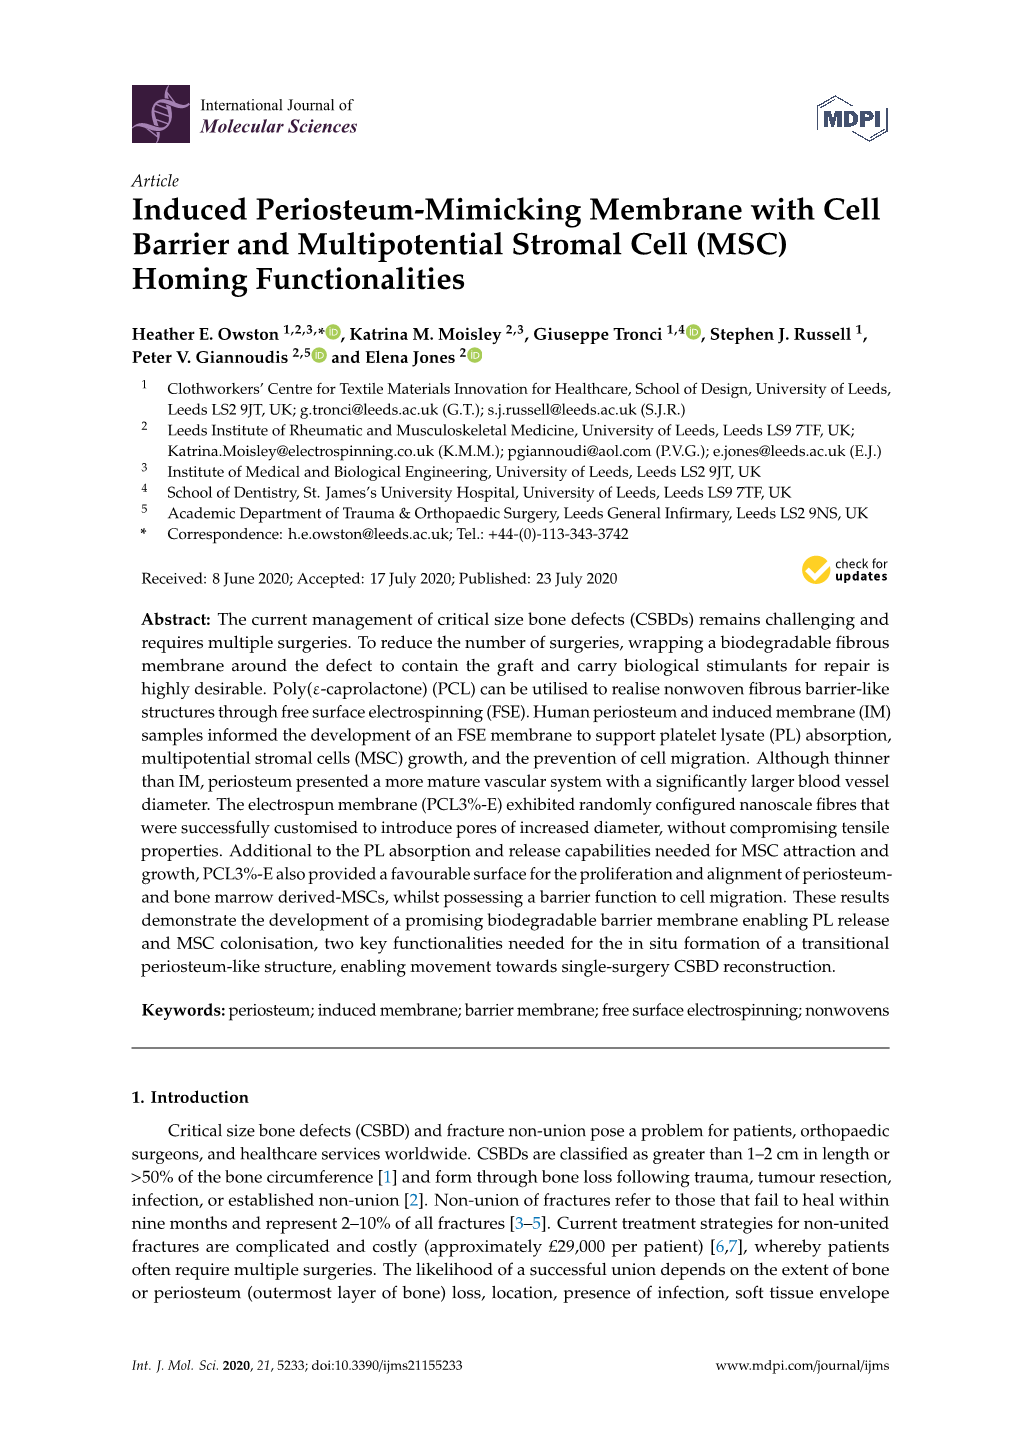 Induced Periosteum-Mimicking Membrane with Cell Barrier and Multipotential Stromal Cell (MSC) Homing Functionalities